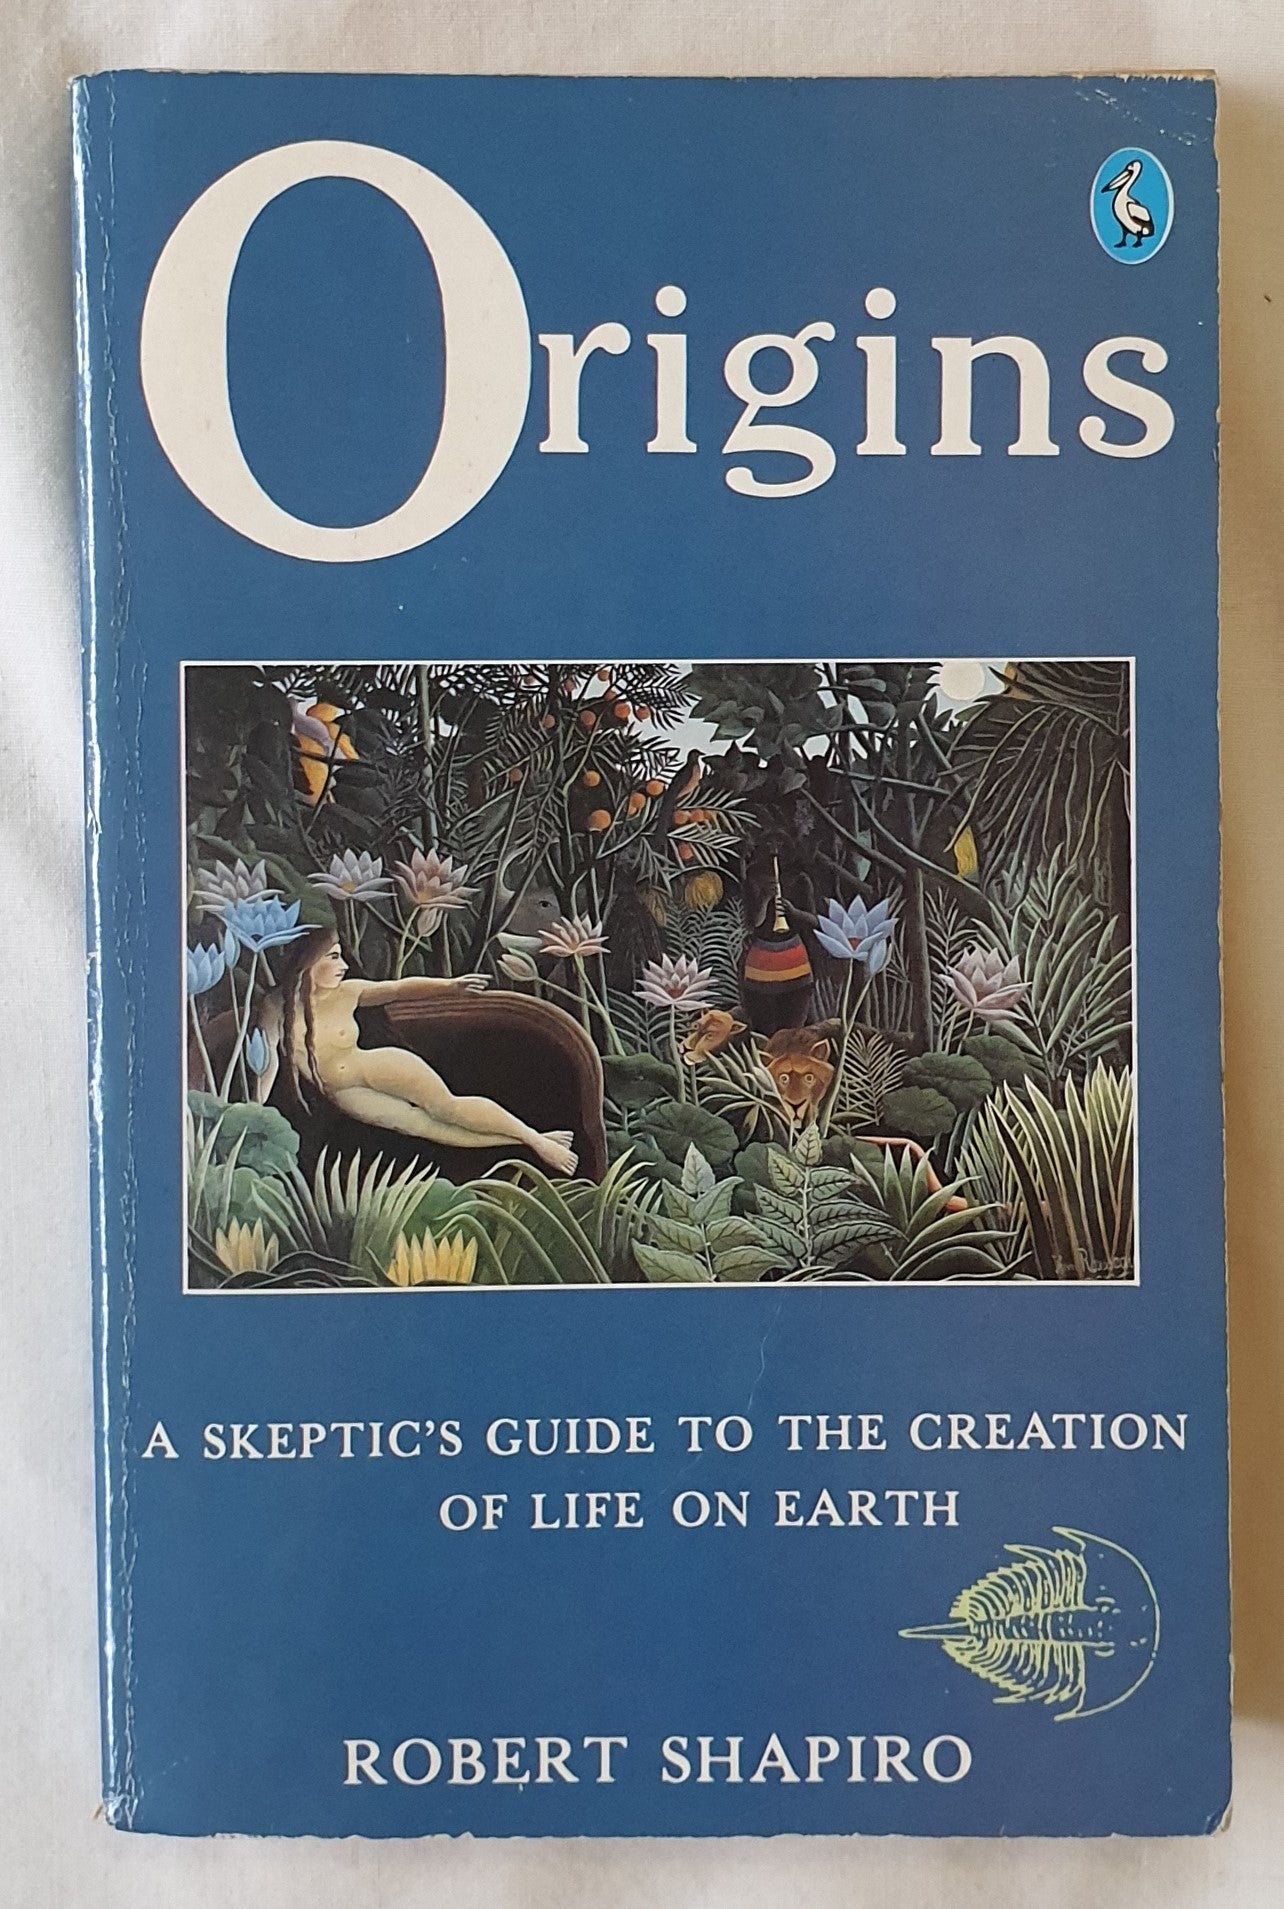 Origins  A Skeptic’s Guide to the Creation of Life on Earth  by Robert Shapiro